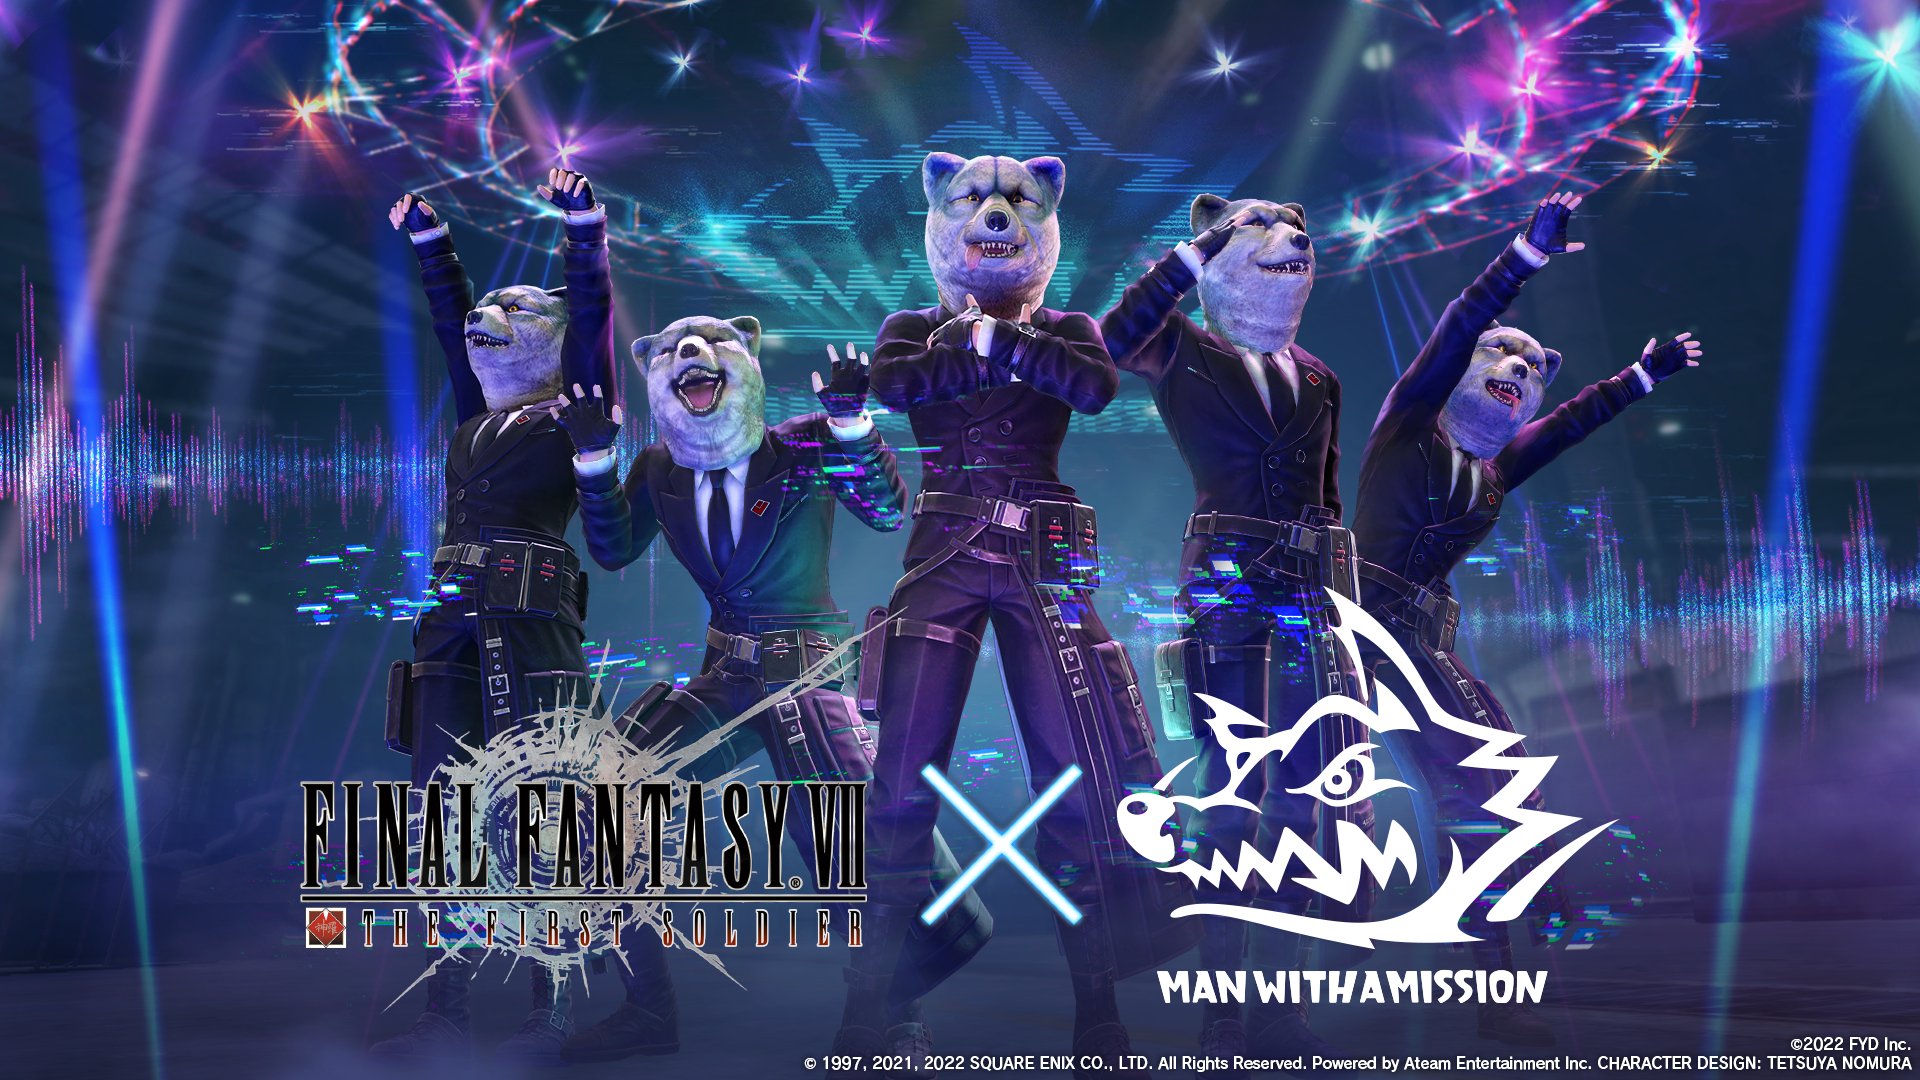 Final Fantasy Vii The First Soldier Jp Ff7fs Man With A Missionと異種コラボ決定 Ff7fs 究極の生命体 Mwam の5匹がフィールドに出現 さらに Ff7fs のために書き下ろした新曲 The Soldiers From The